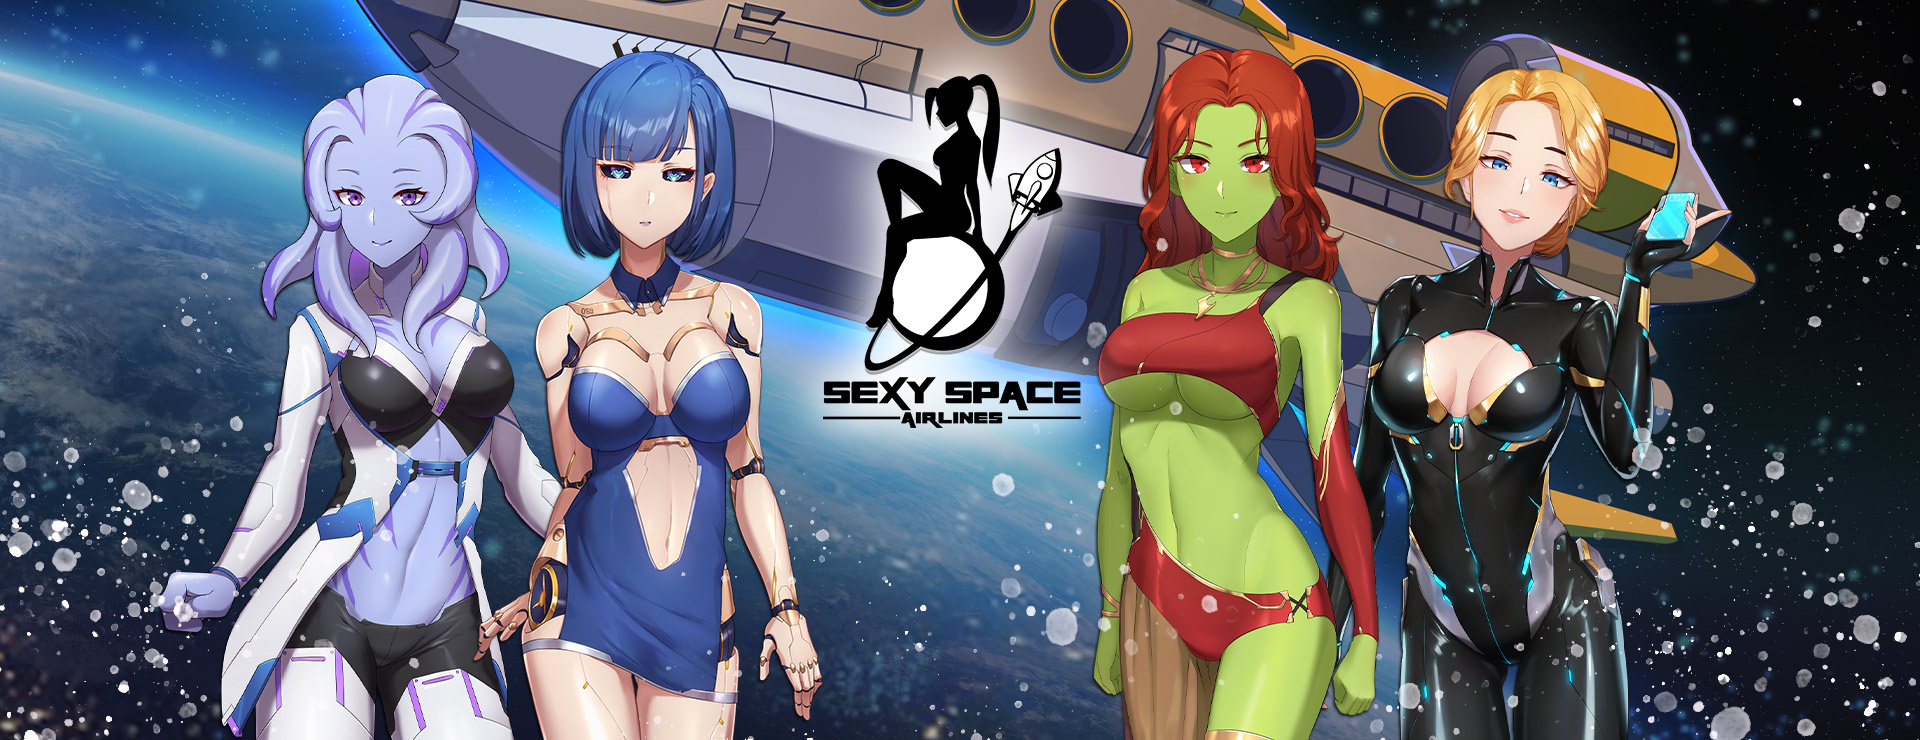 Sexy Space Airlines Game - Action Adventure Spiel